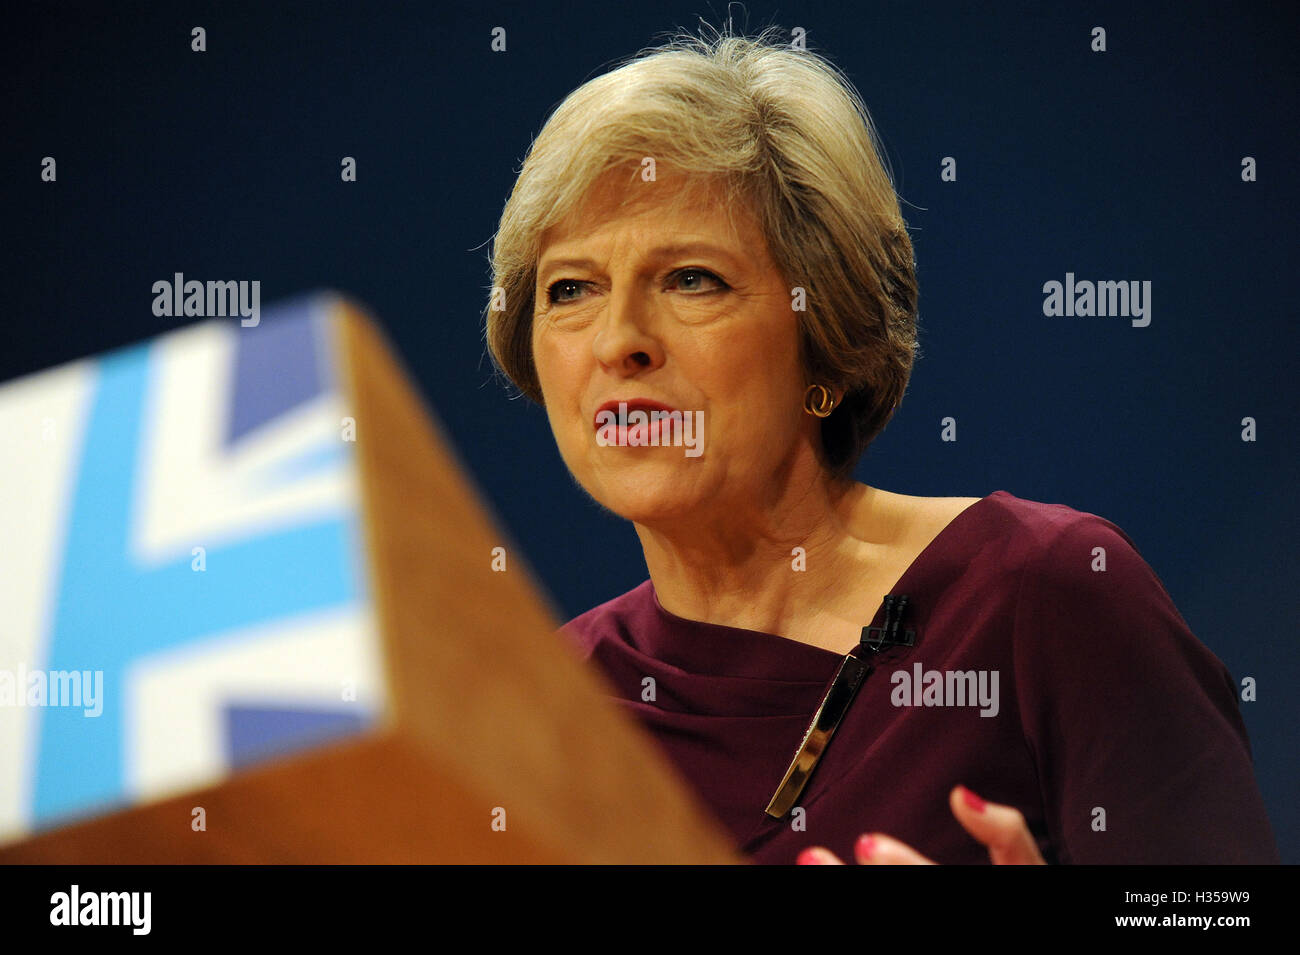 Birmingham, UK. 5th Oct, 2016. Theresa May, Prime Minister and Leader of the Conservative Party delivers her speech to conference, on the fourth and final day of the Conservative Party Conference at the ICC Birmingham. The theme of the speech was 'A Country that Works for Everyone'. This conference follows the referendum decision for the UK to leave the European Union, and the subsequent election of Theresa May as leader of the Conservative Party. Credit:  Kevin Hayes/Alamy Live News Stock Photo